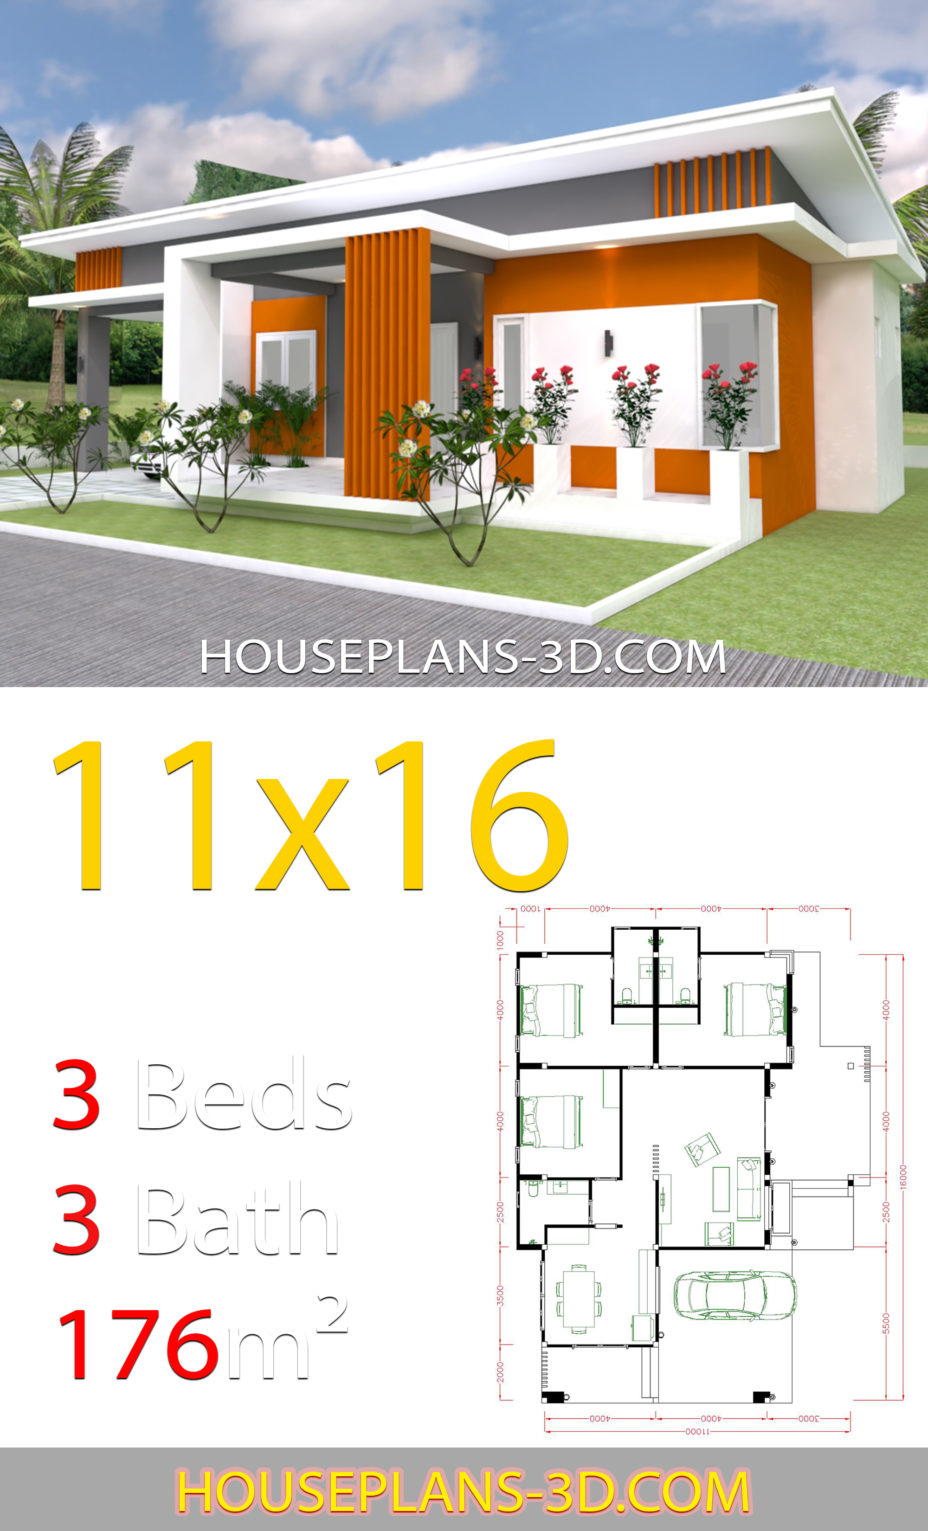 Home Design 11x16 With 3 Bedrooms Slop Roof - House Plans 3d